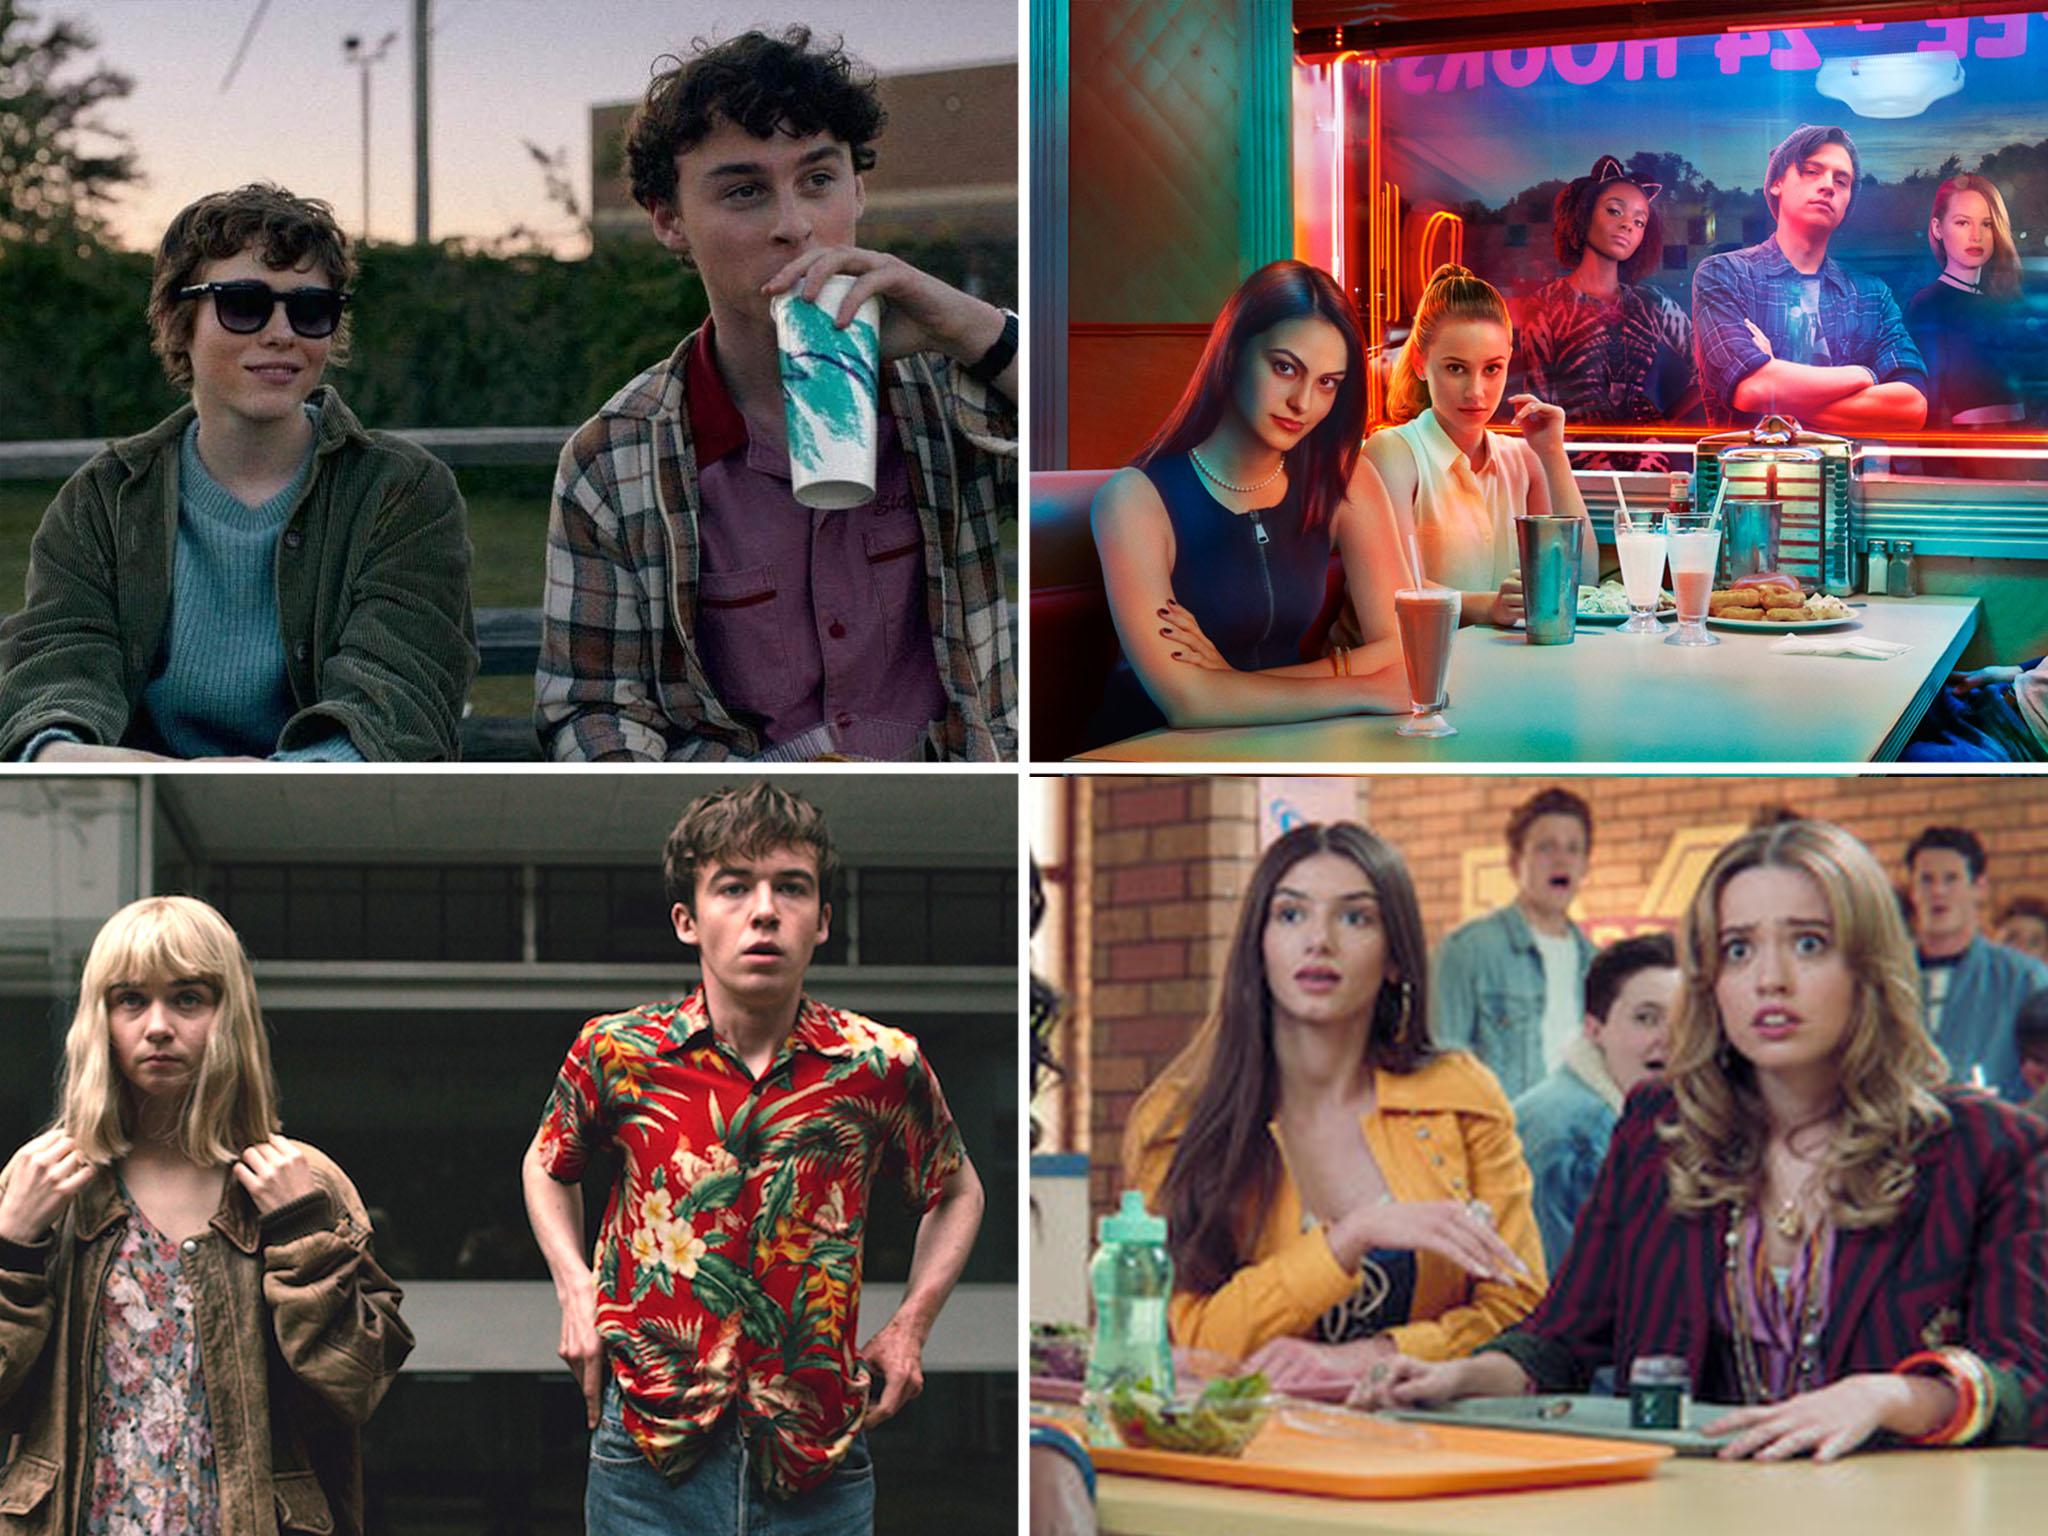 From top left clockwise: ‘I Am Not Okay with This’, ‘Riverdale’, ‘Sex Education’ and ‘The End of the F***ing World’